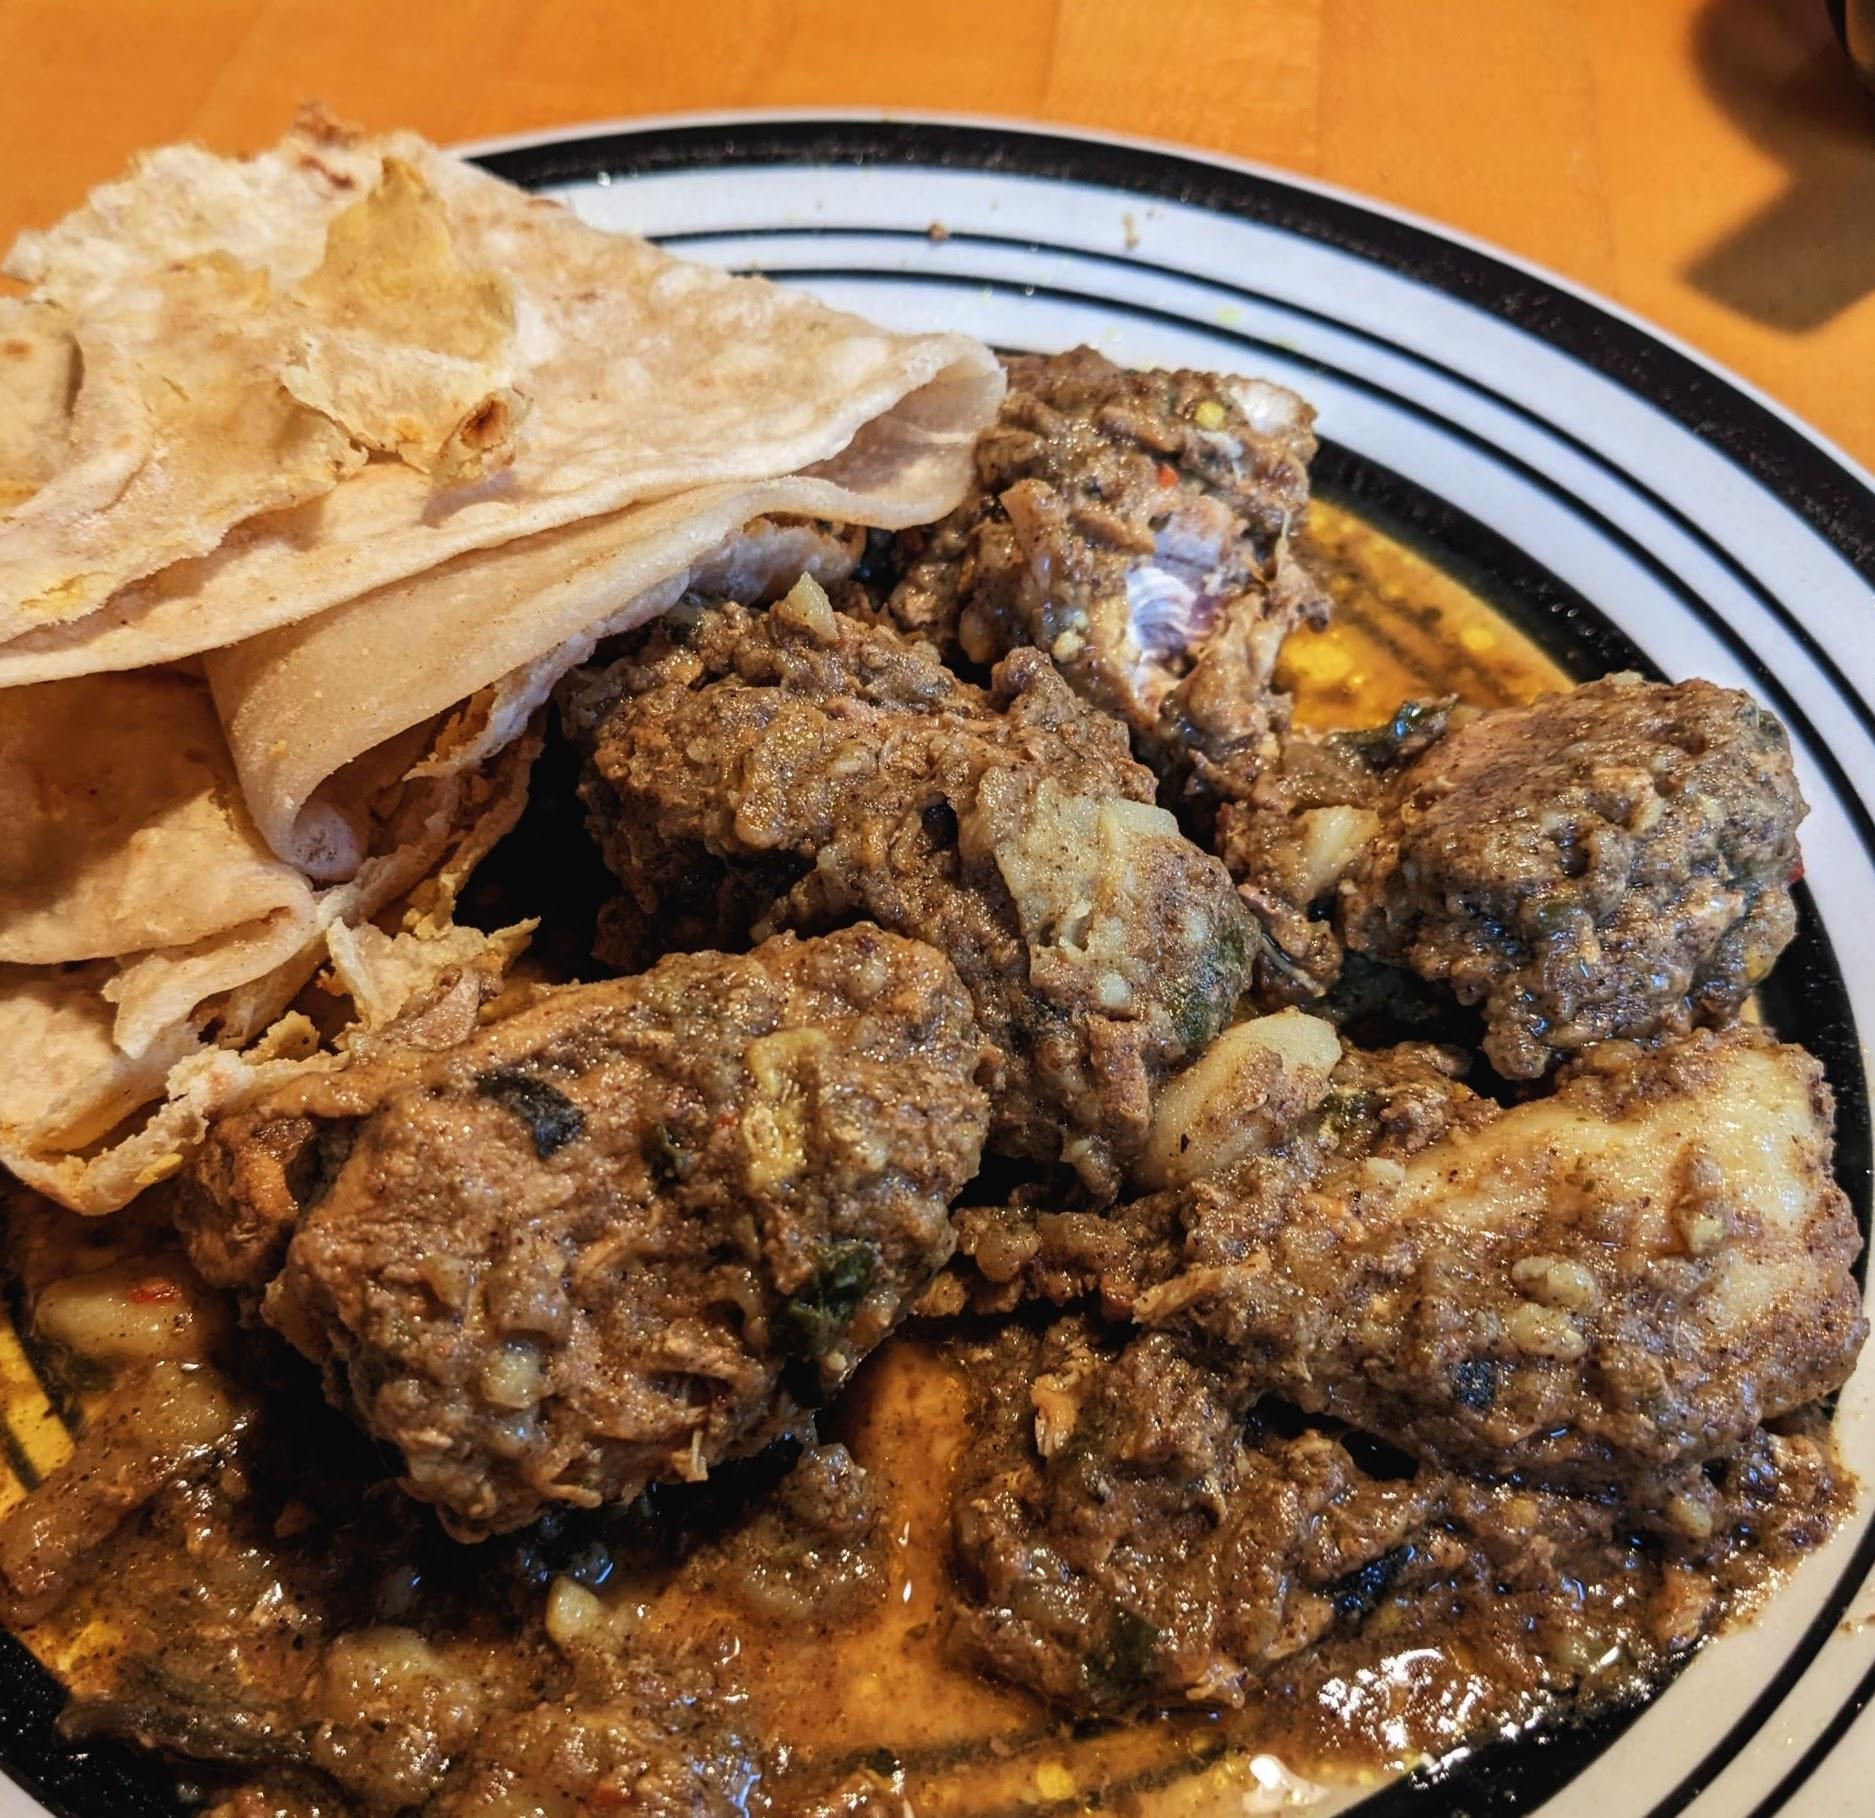 Trinidadian curry chicken served with a side of roti